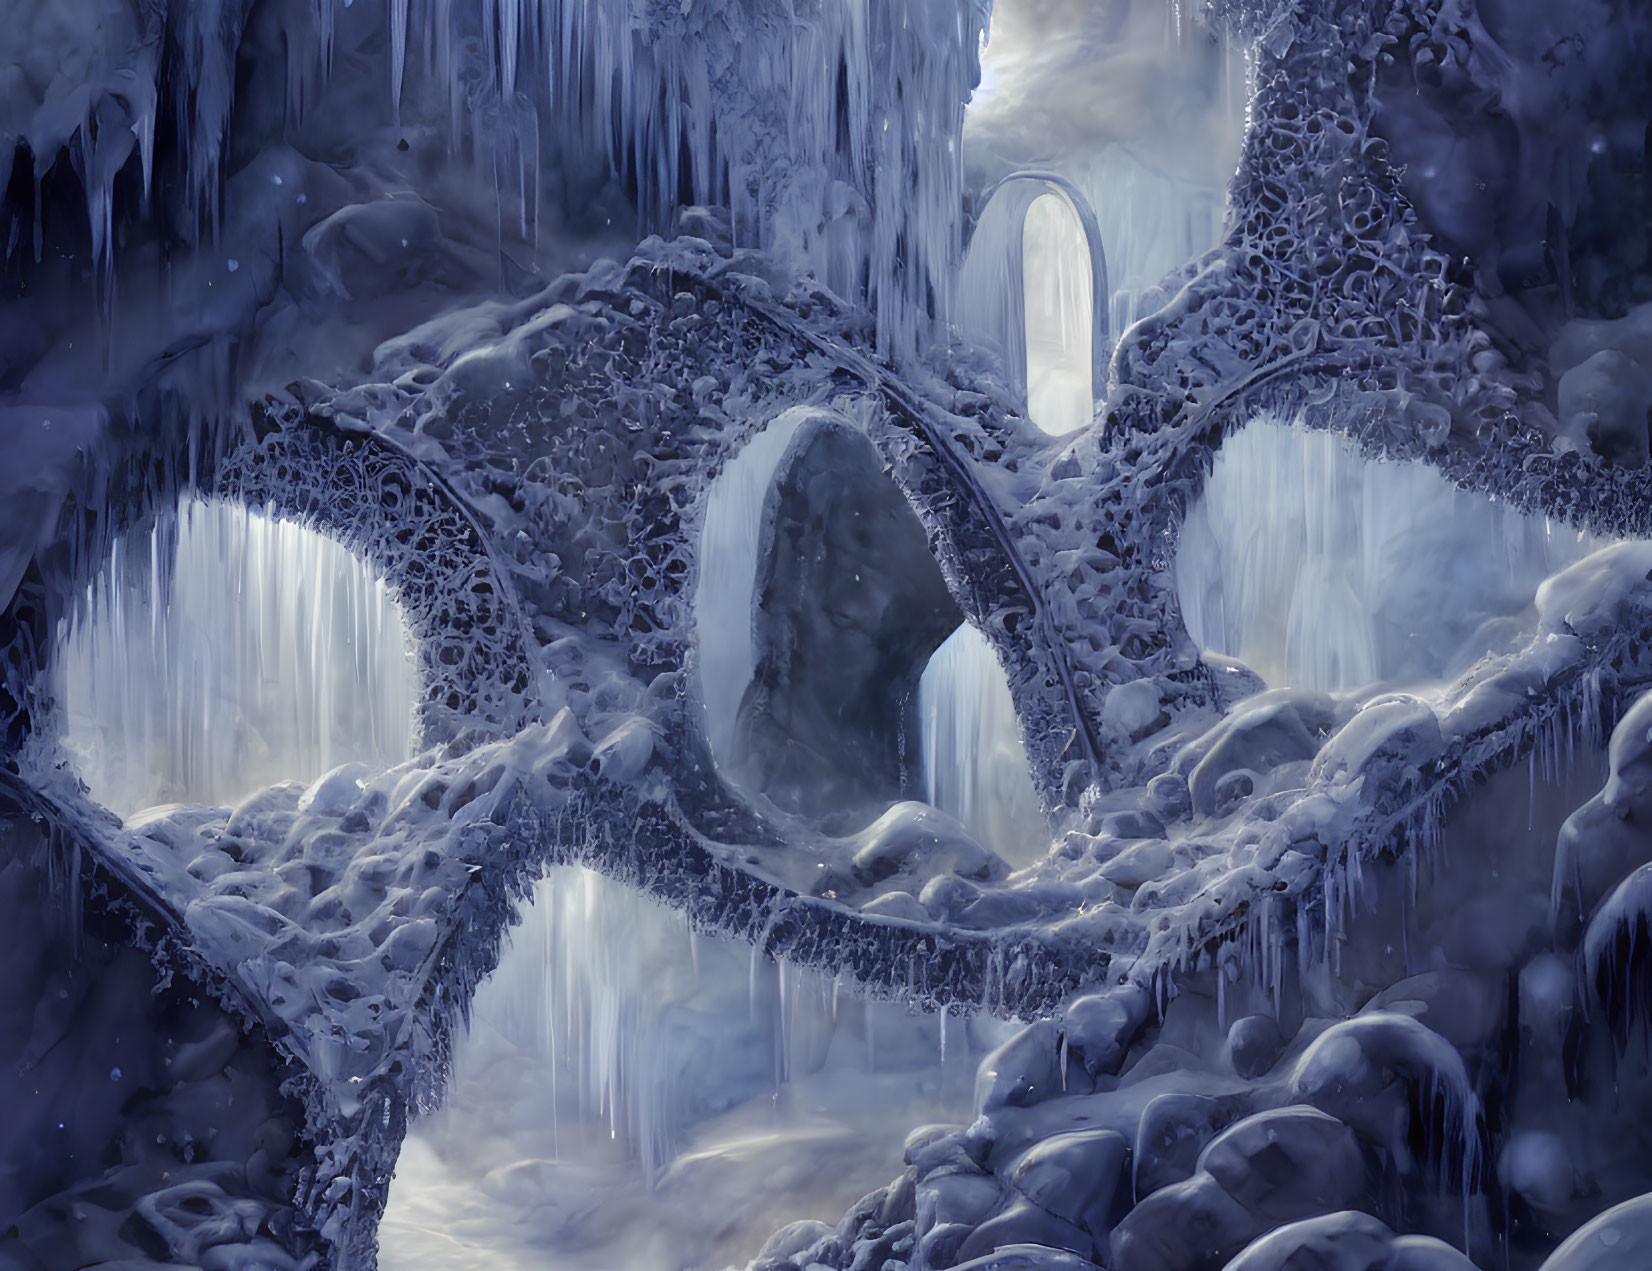 Ethereal icy cave with natural archways and icicles